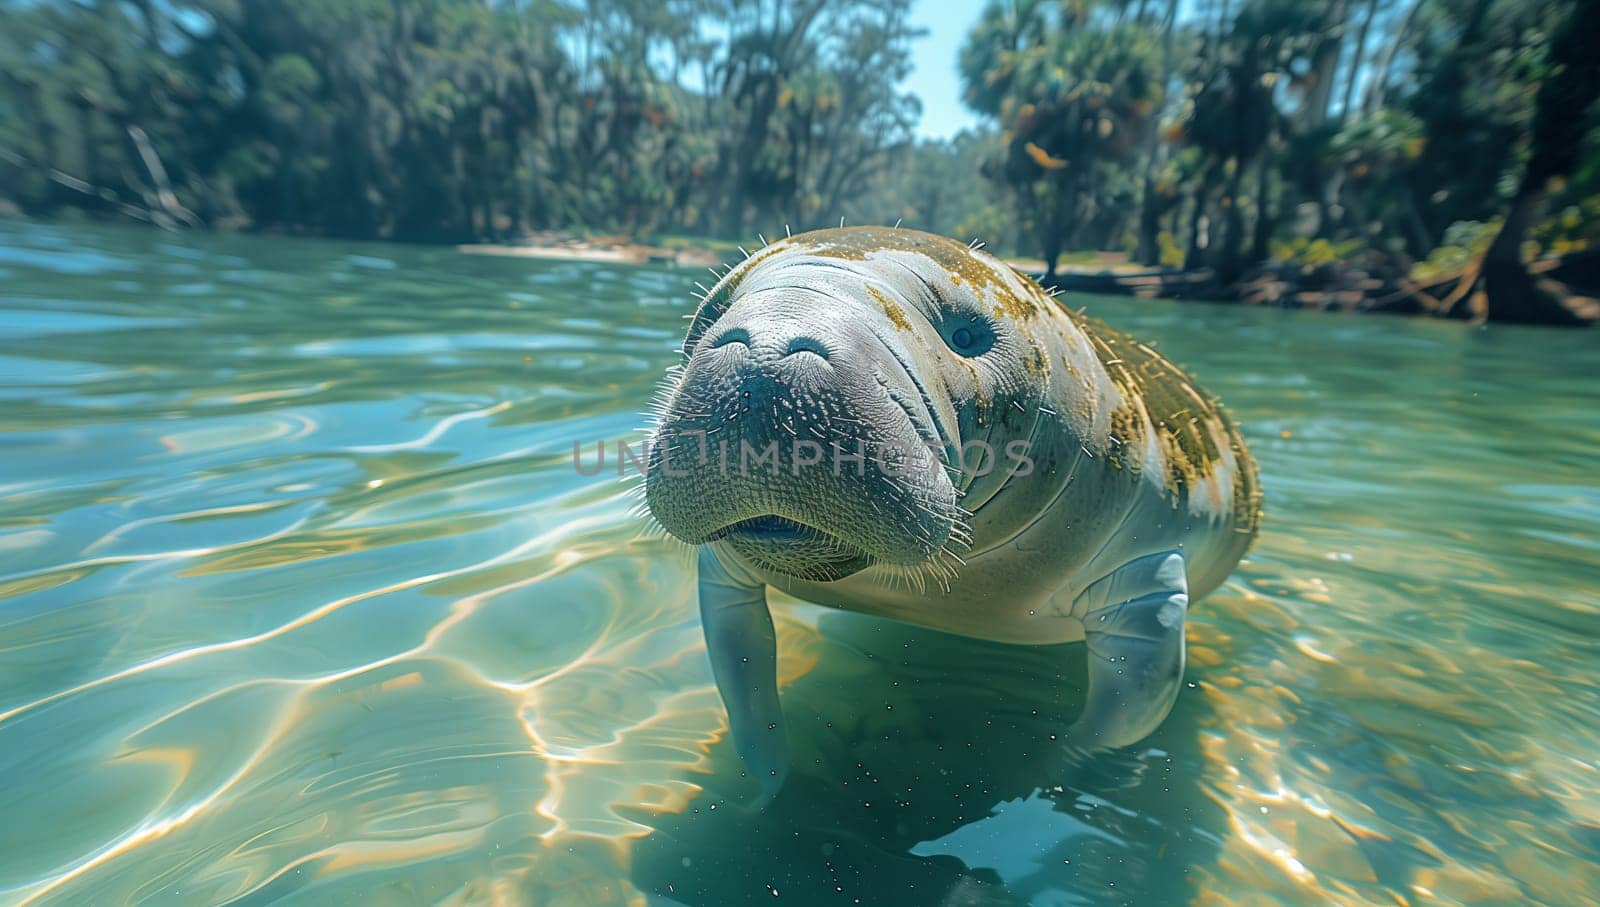 A manatee is gracefully swimming underwater, gazing at the camera by richwolf